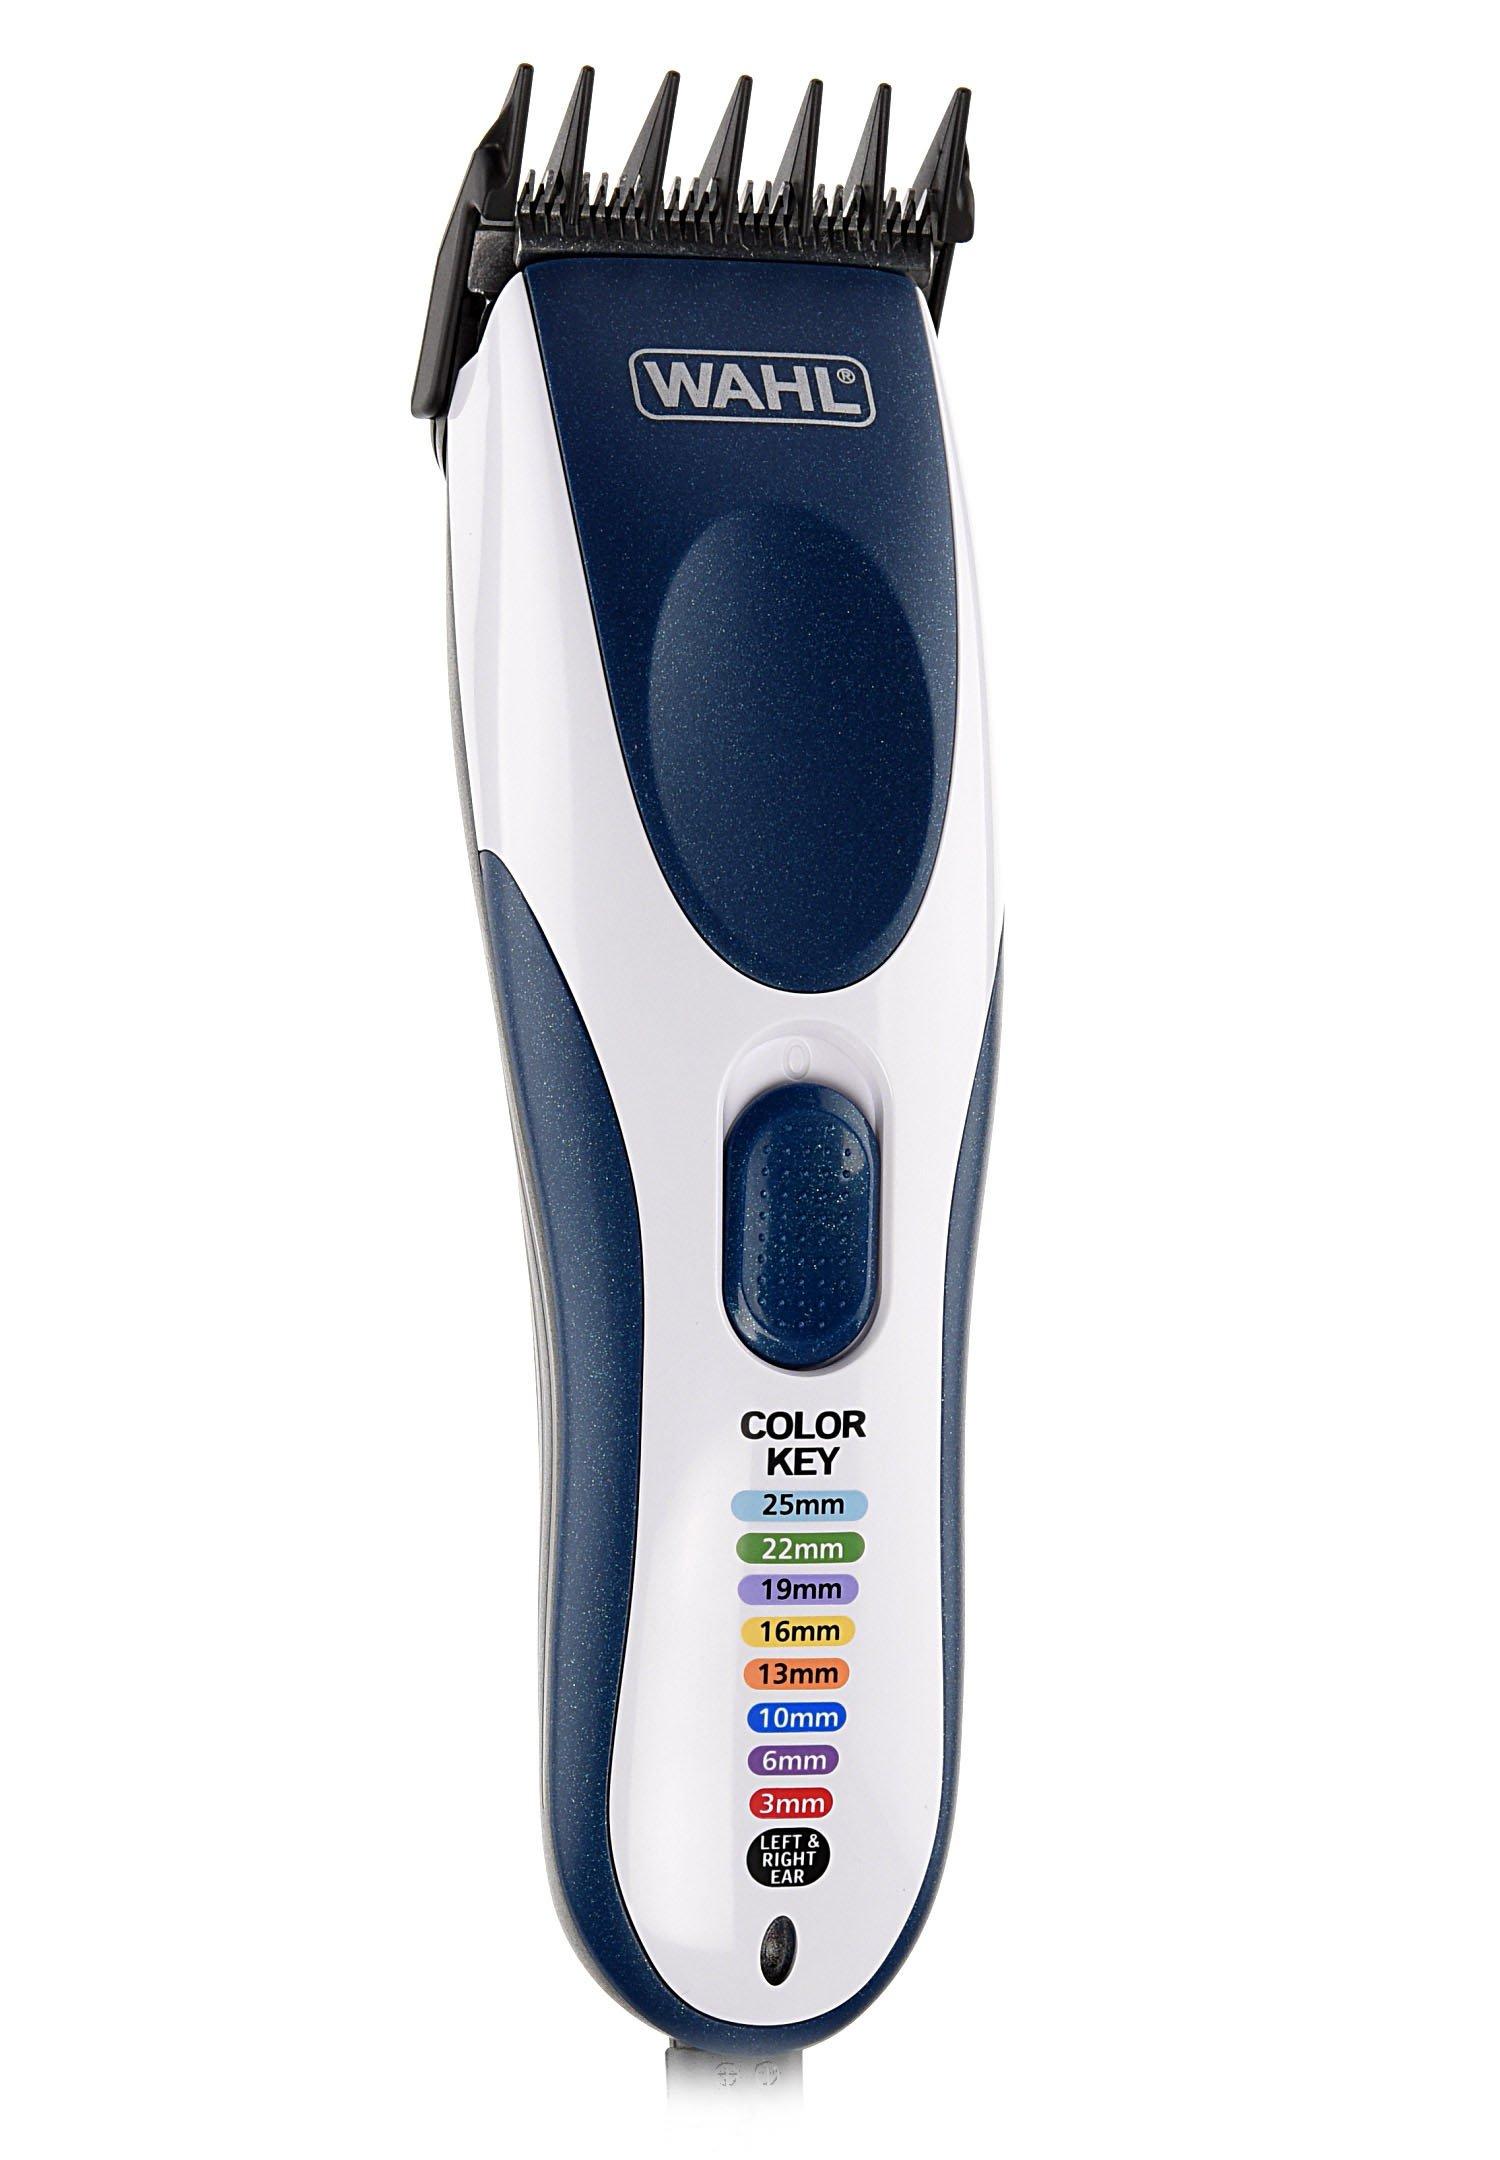 wahl hair clippers 9649